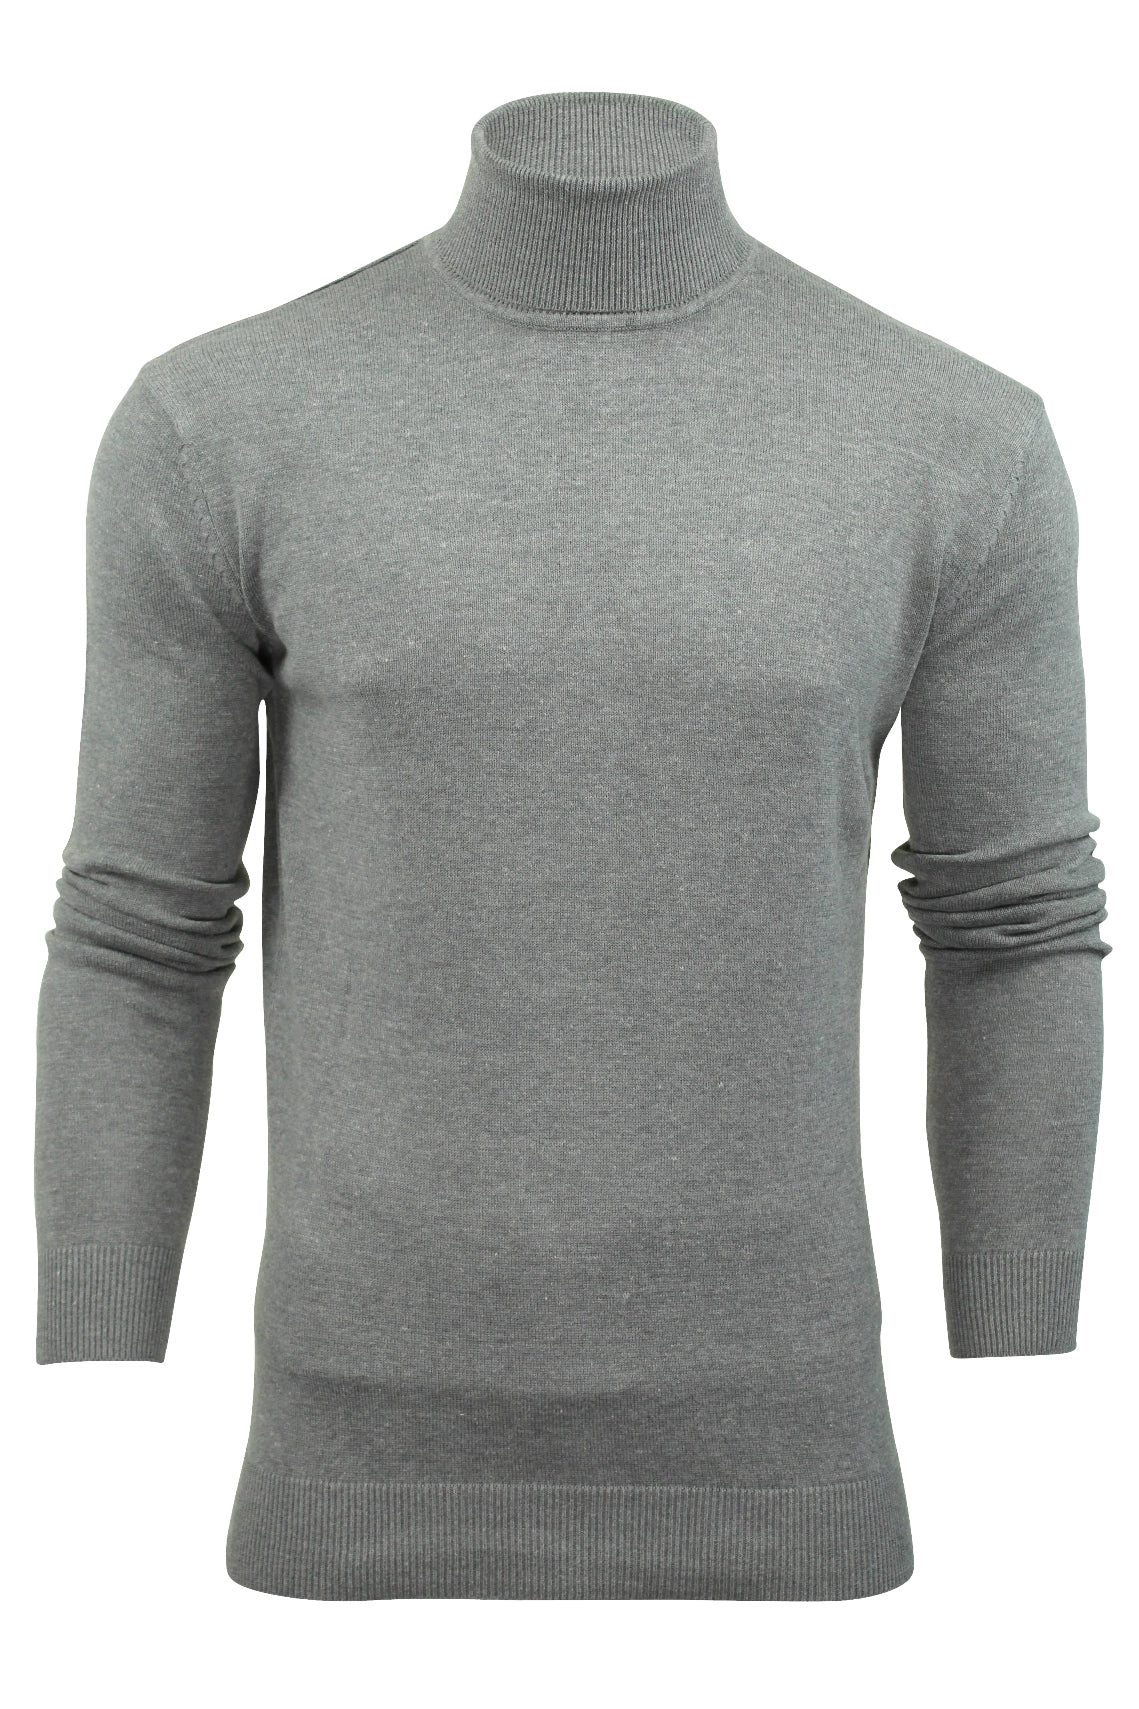 Mens Roll-Neck Jumper by Xact Long Sleeved (Heather Grey)-Main Image